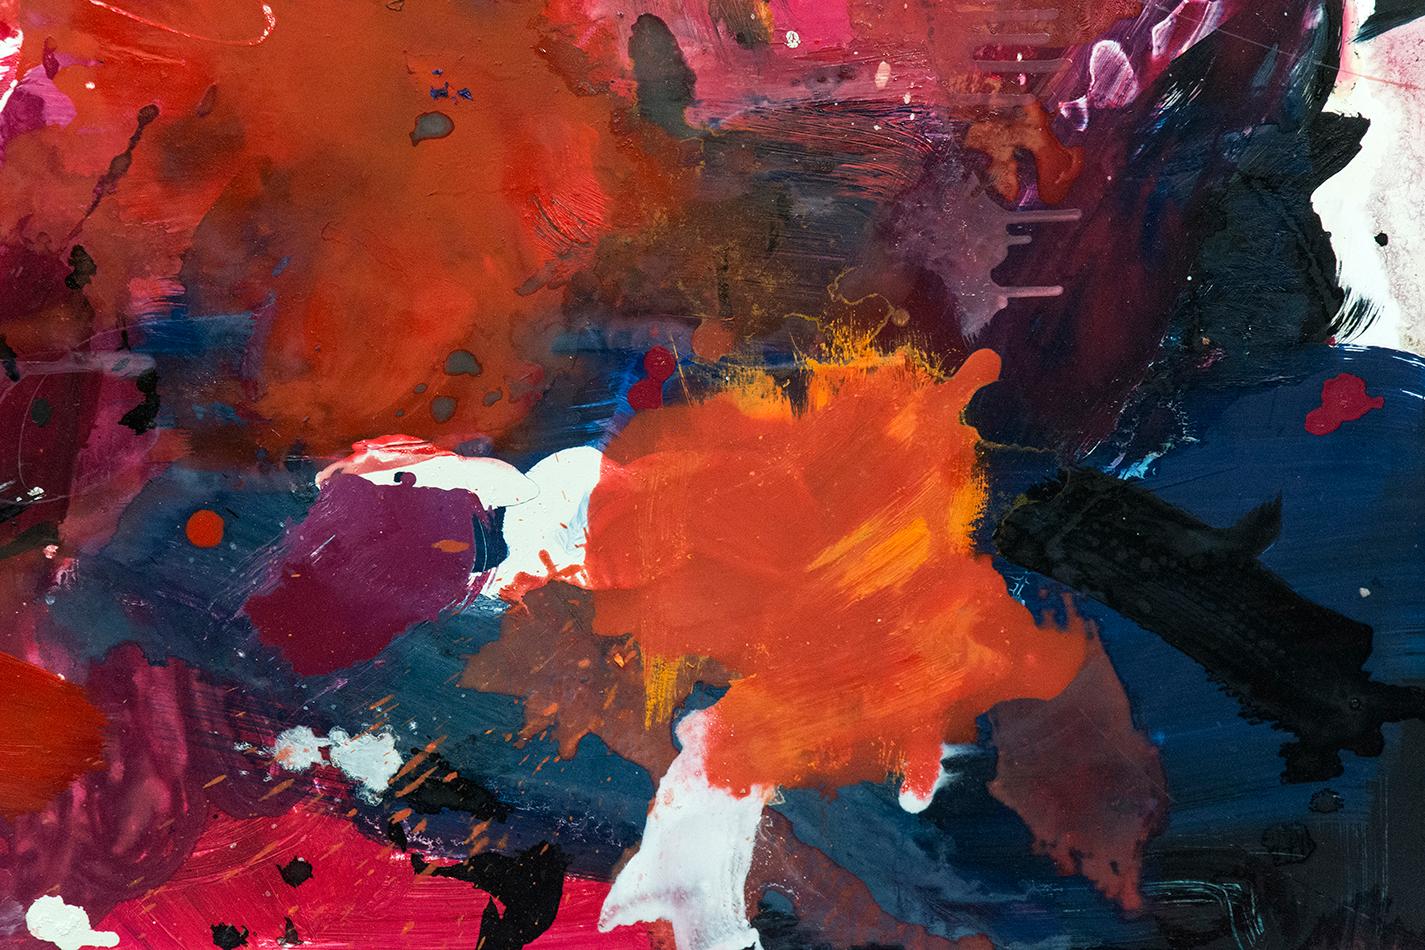 Gestural passages of crimson, red-orange and indigo are caught in a vigorous eddy of movement in this dynamic composition by Scott Pattinson. This canvas has its roots in the spontaneity of surrealism and the passion of 20th century abstract